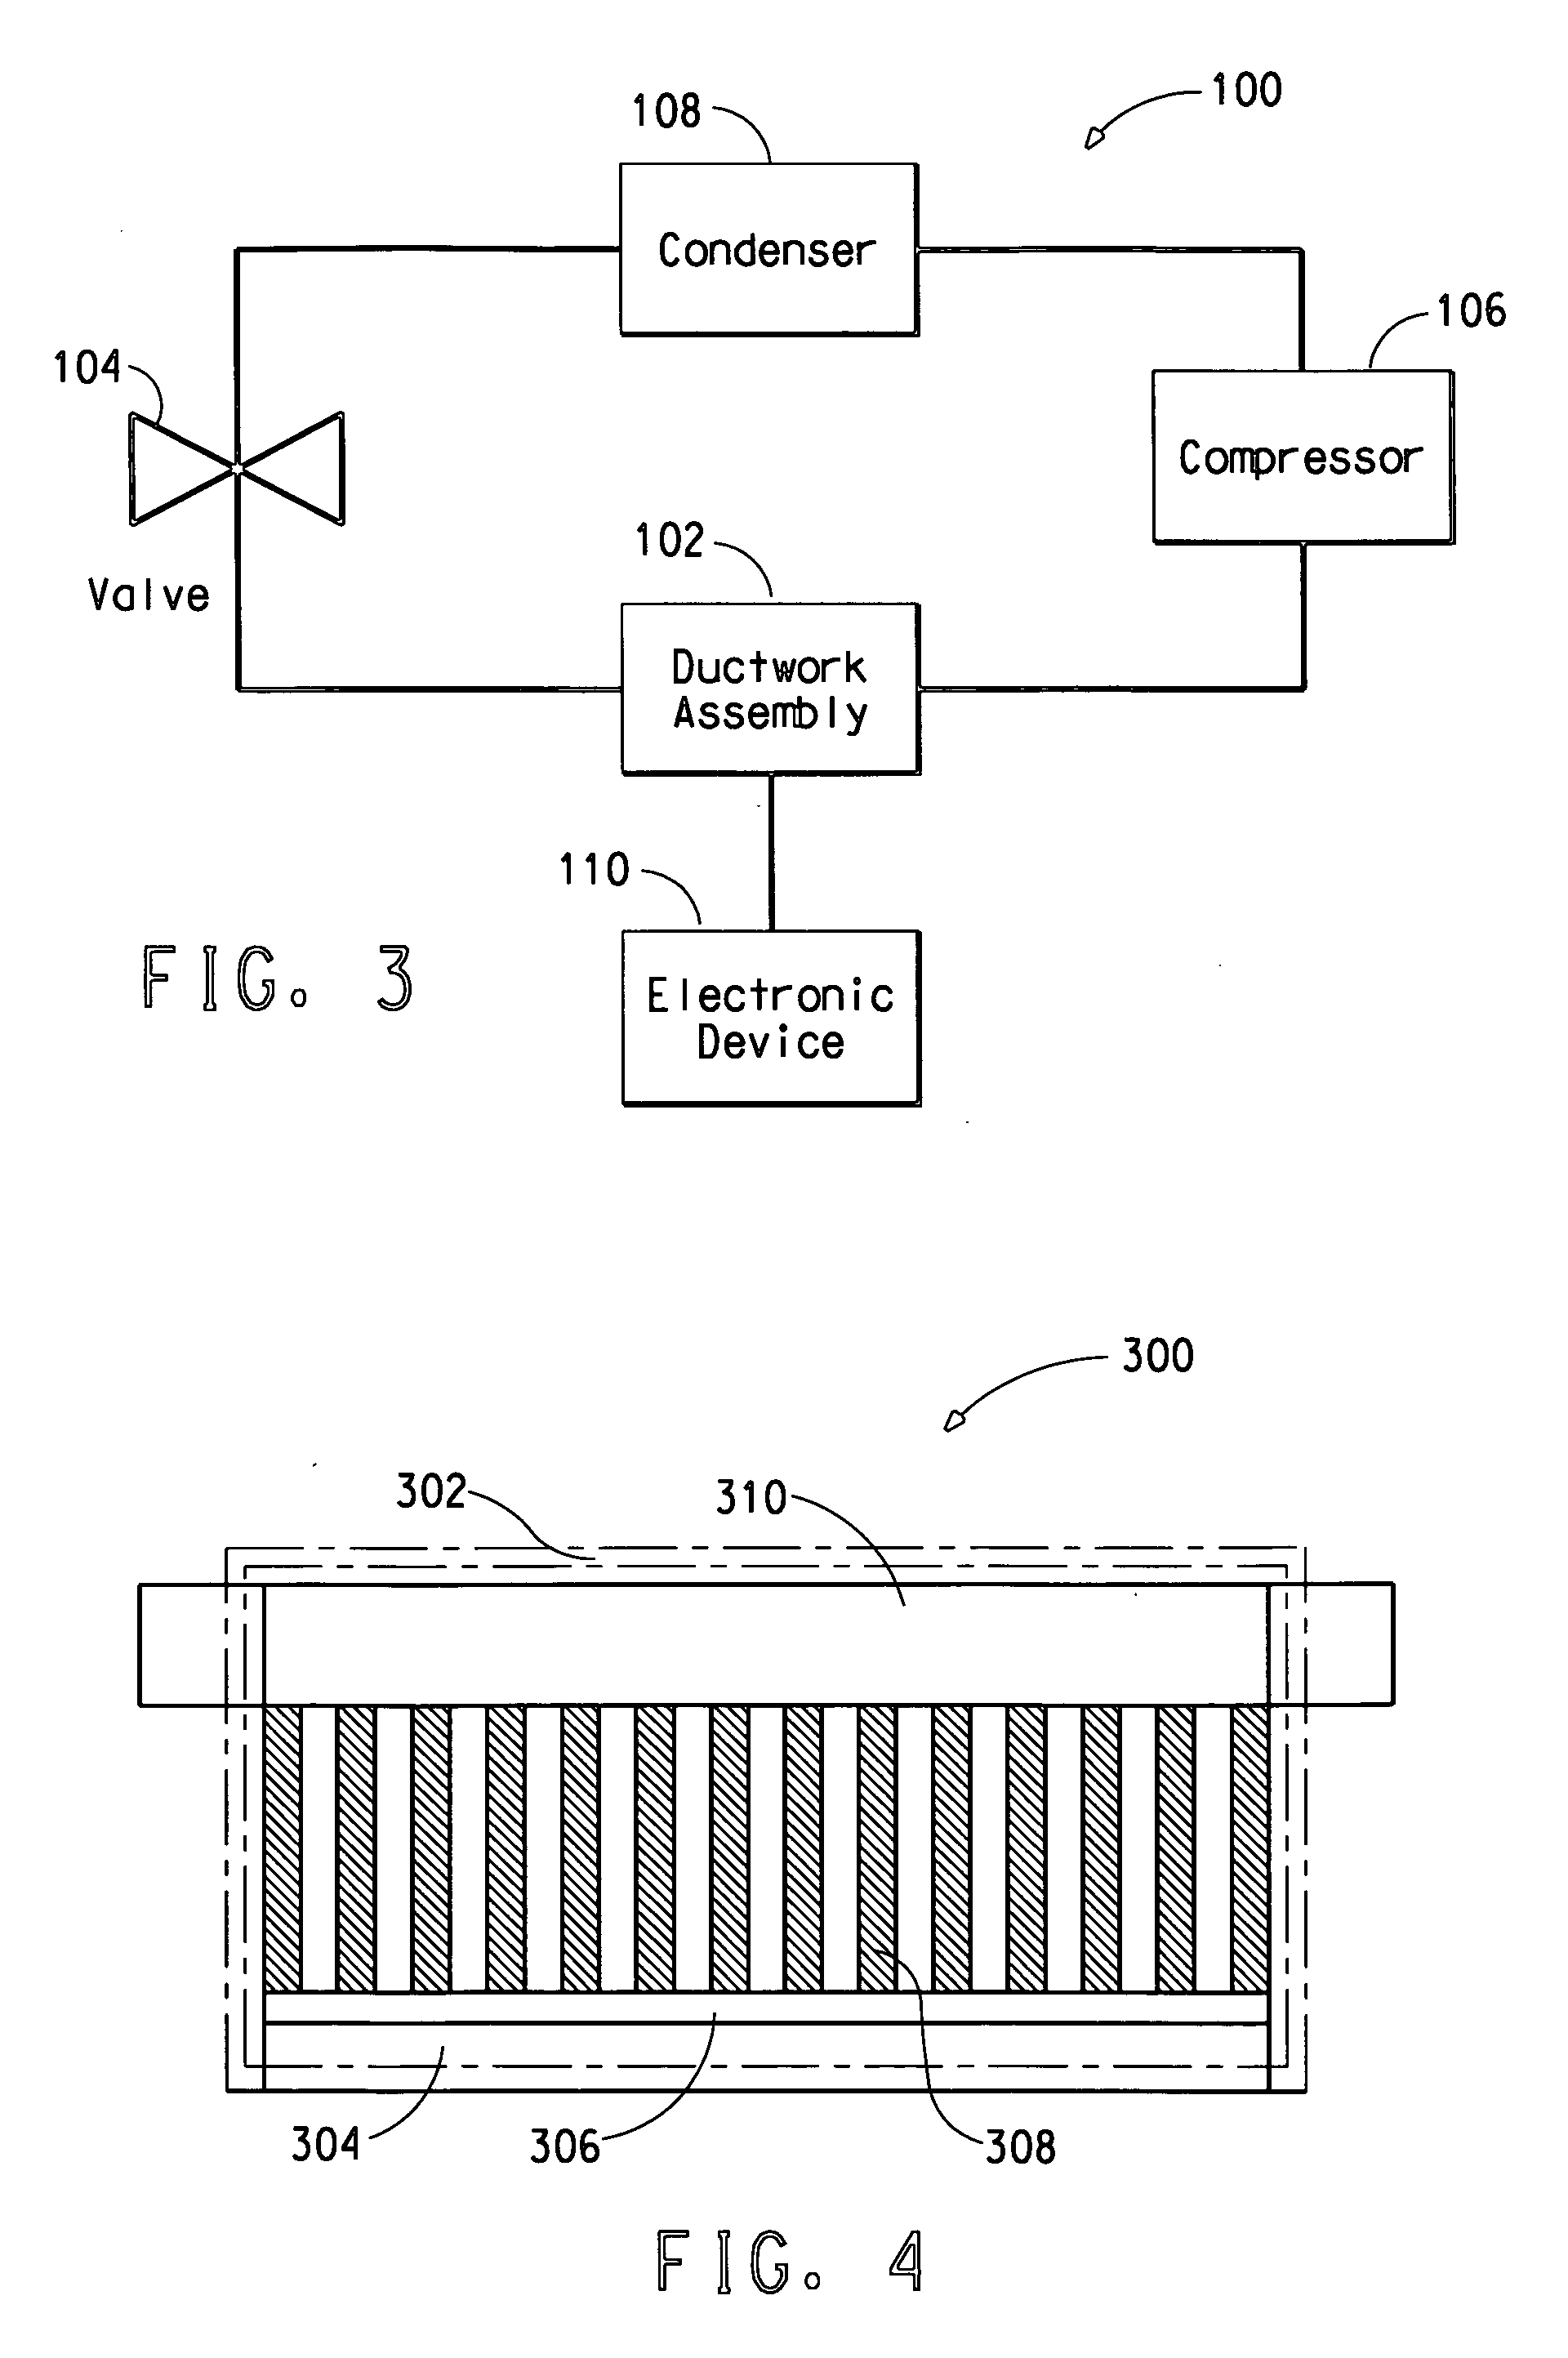 Electronic device having a temperature control system including a ductwork assembly